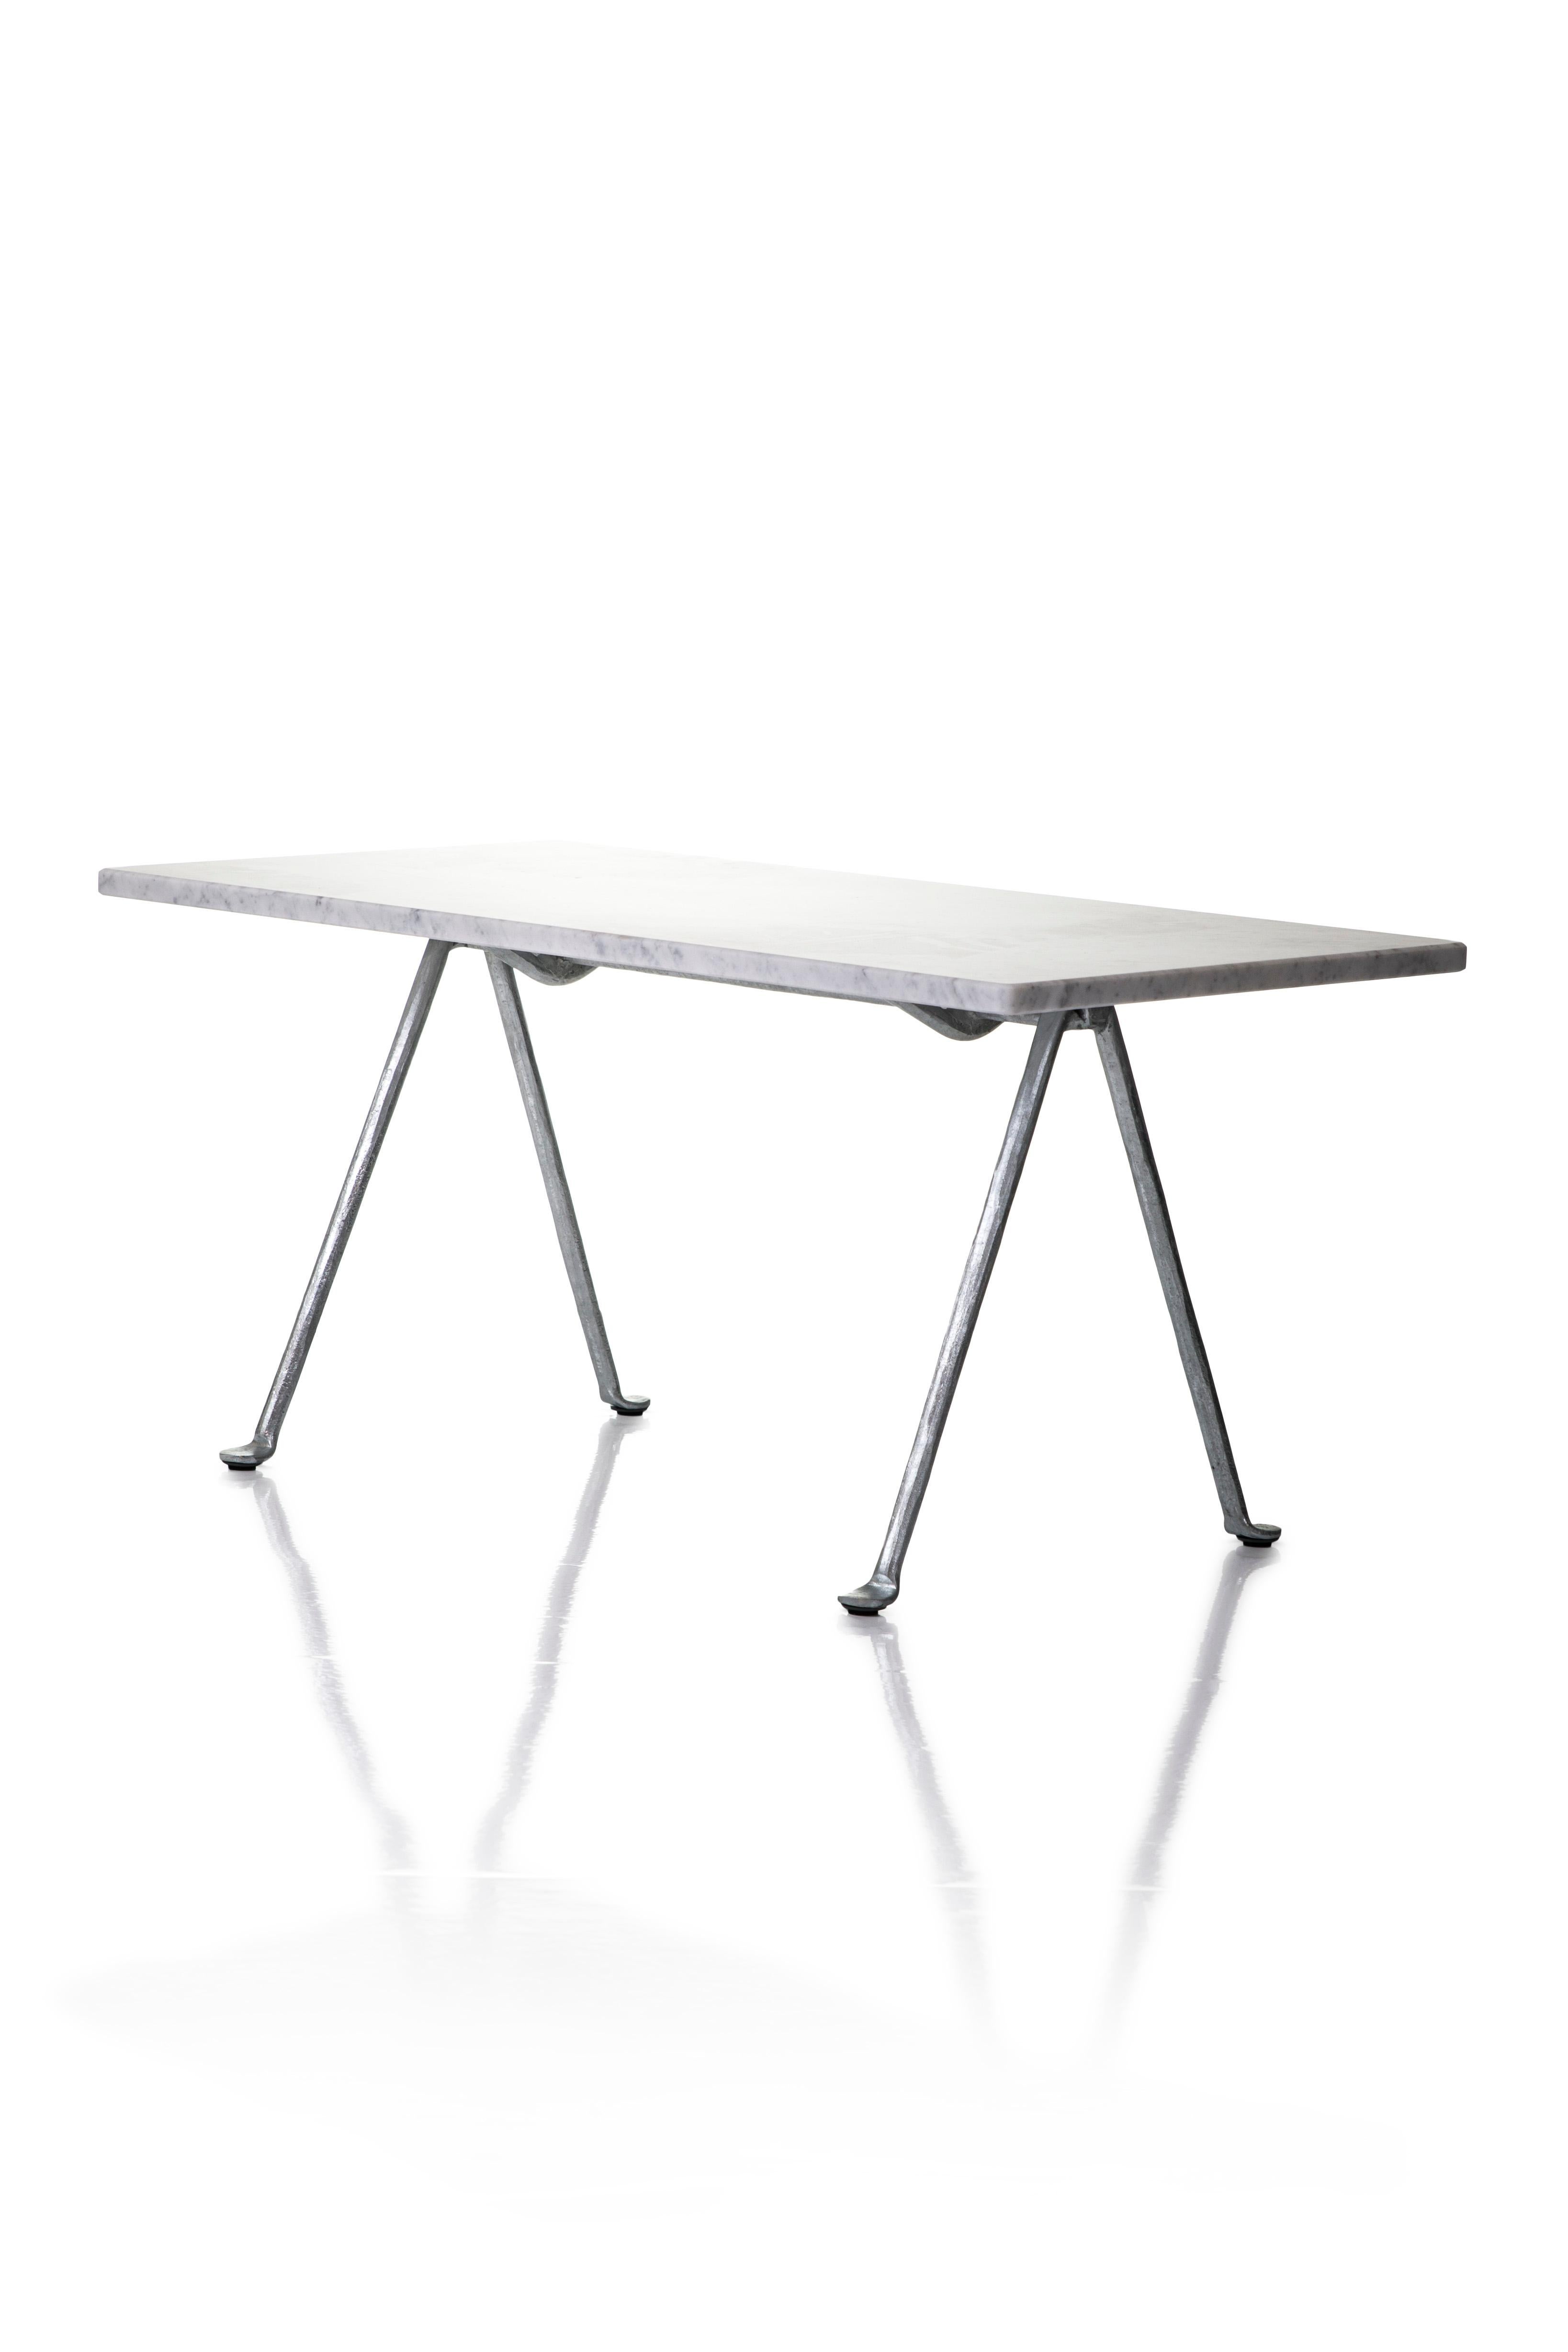 Italian Officina Low Table by Ronan & Erwan Boroullec for MAGIS For Sale